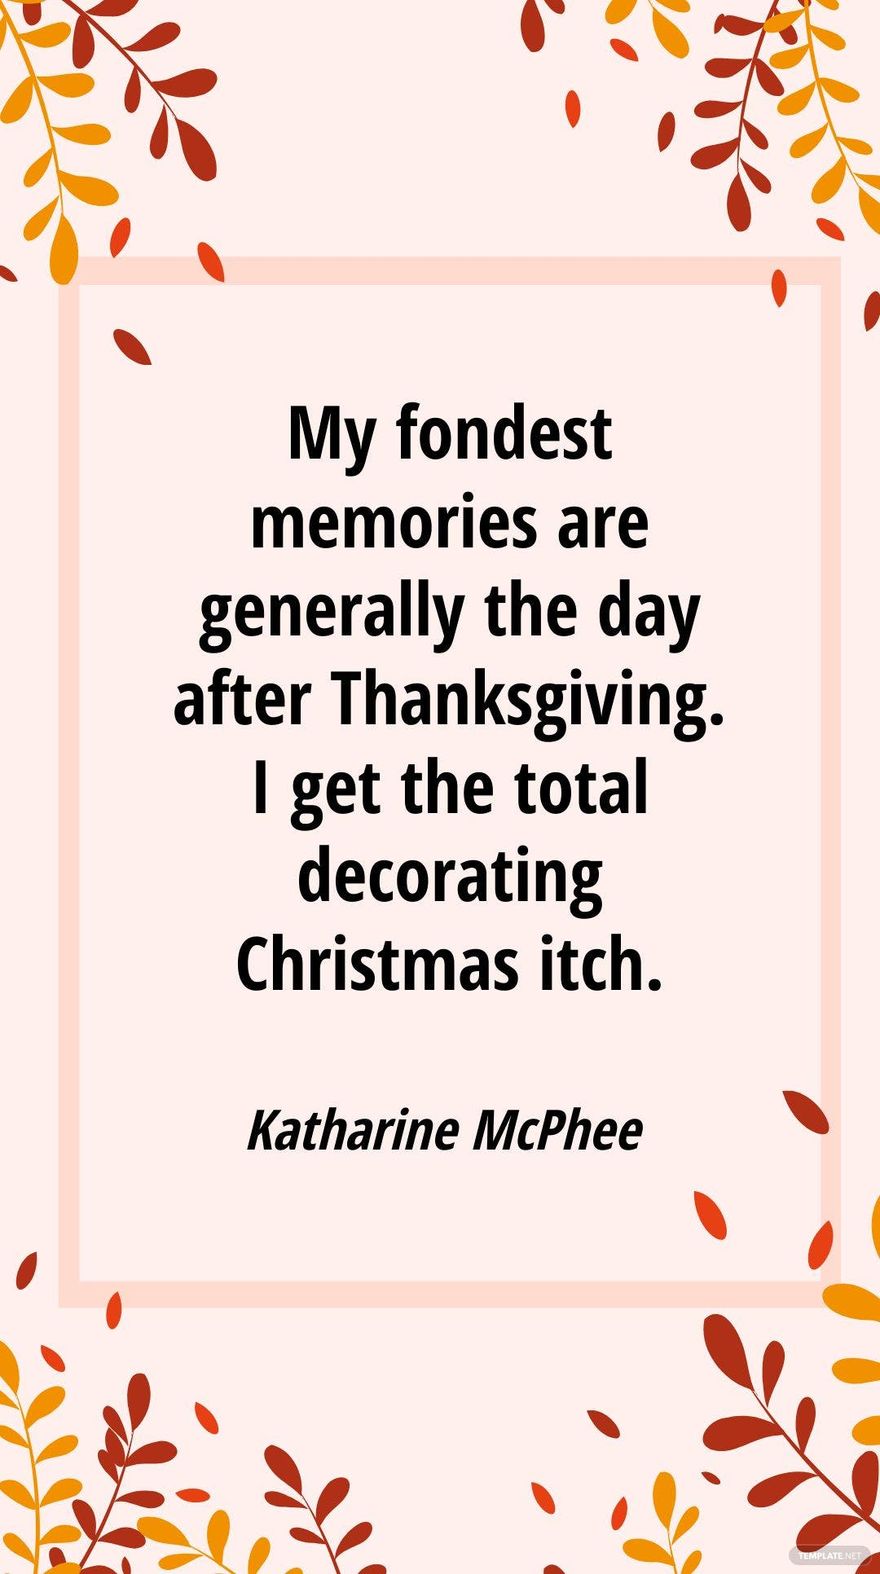 Katharine McPhee - My fondest memories are generally the day after Thanksgiving. I get the total decorating Christmas itch. in JPG